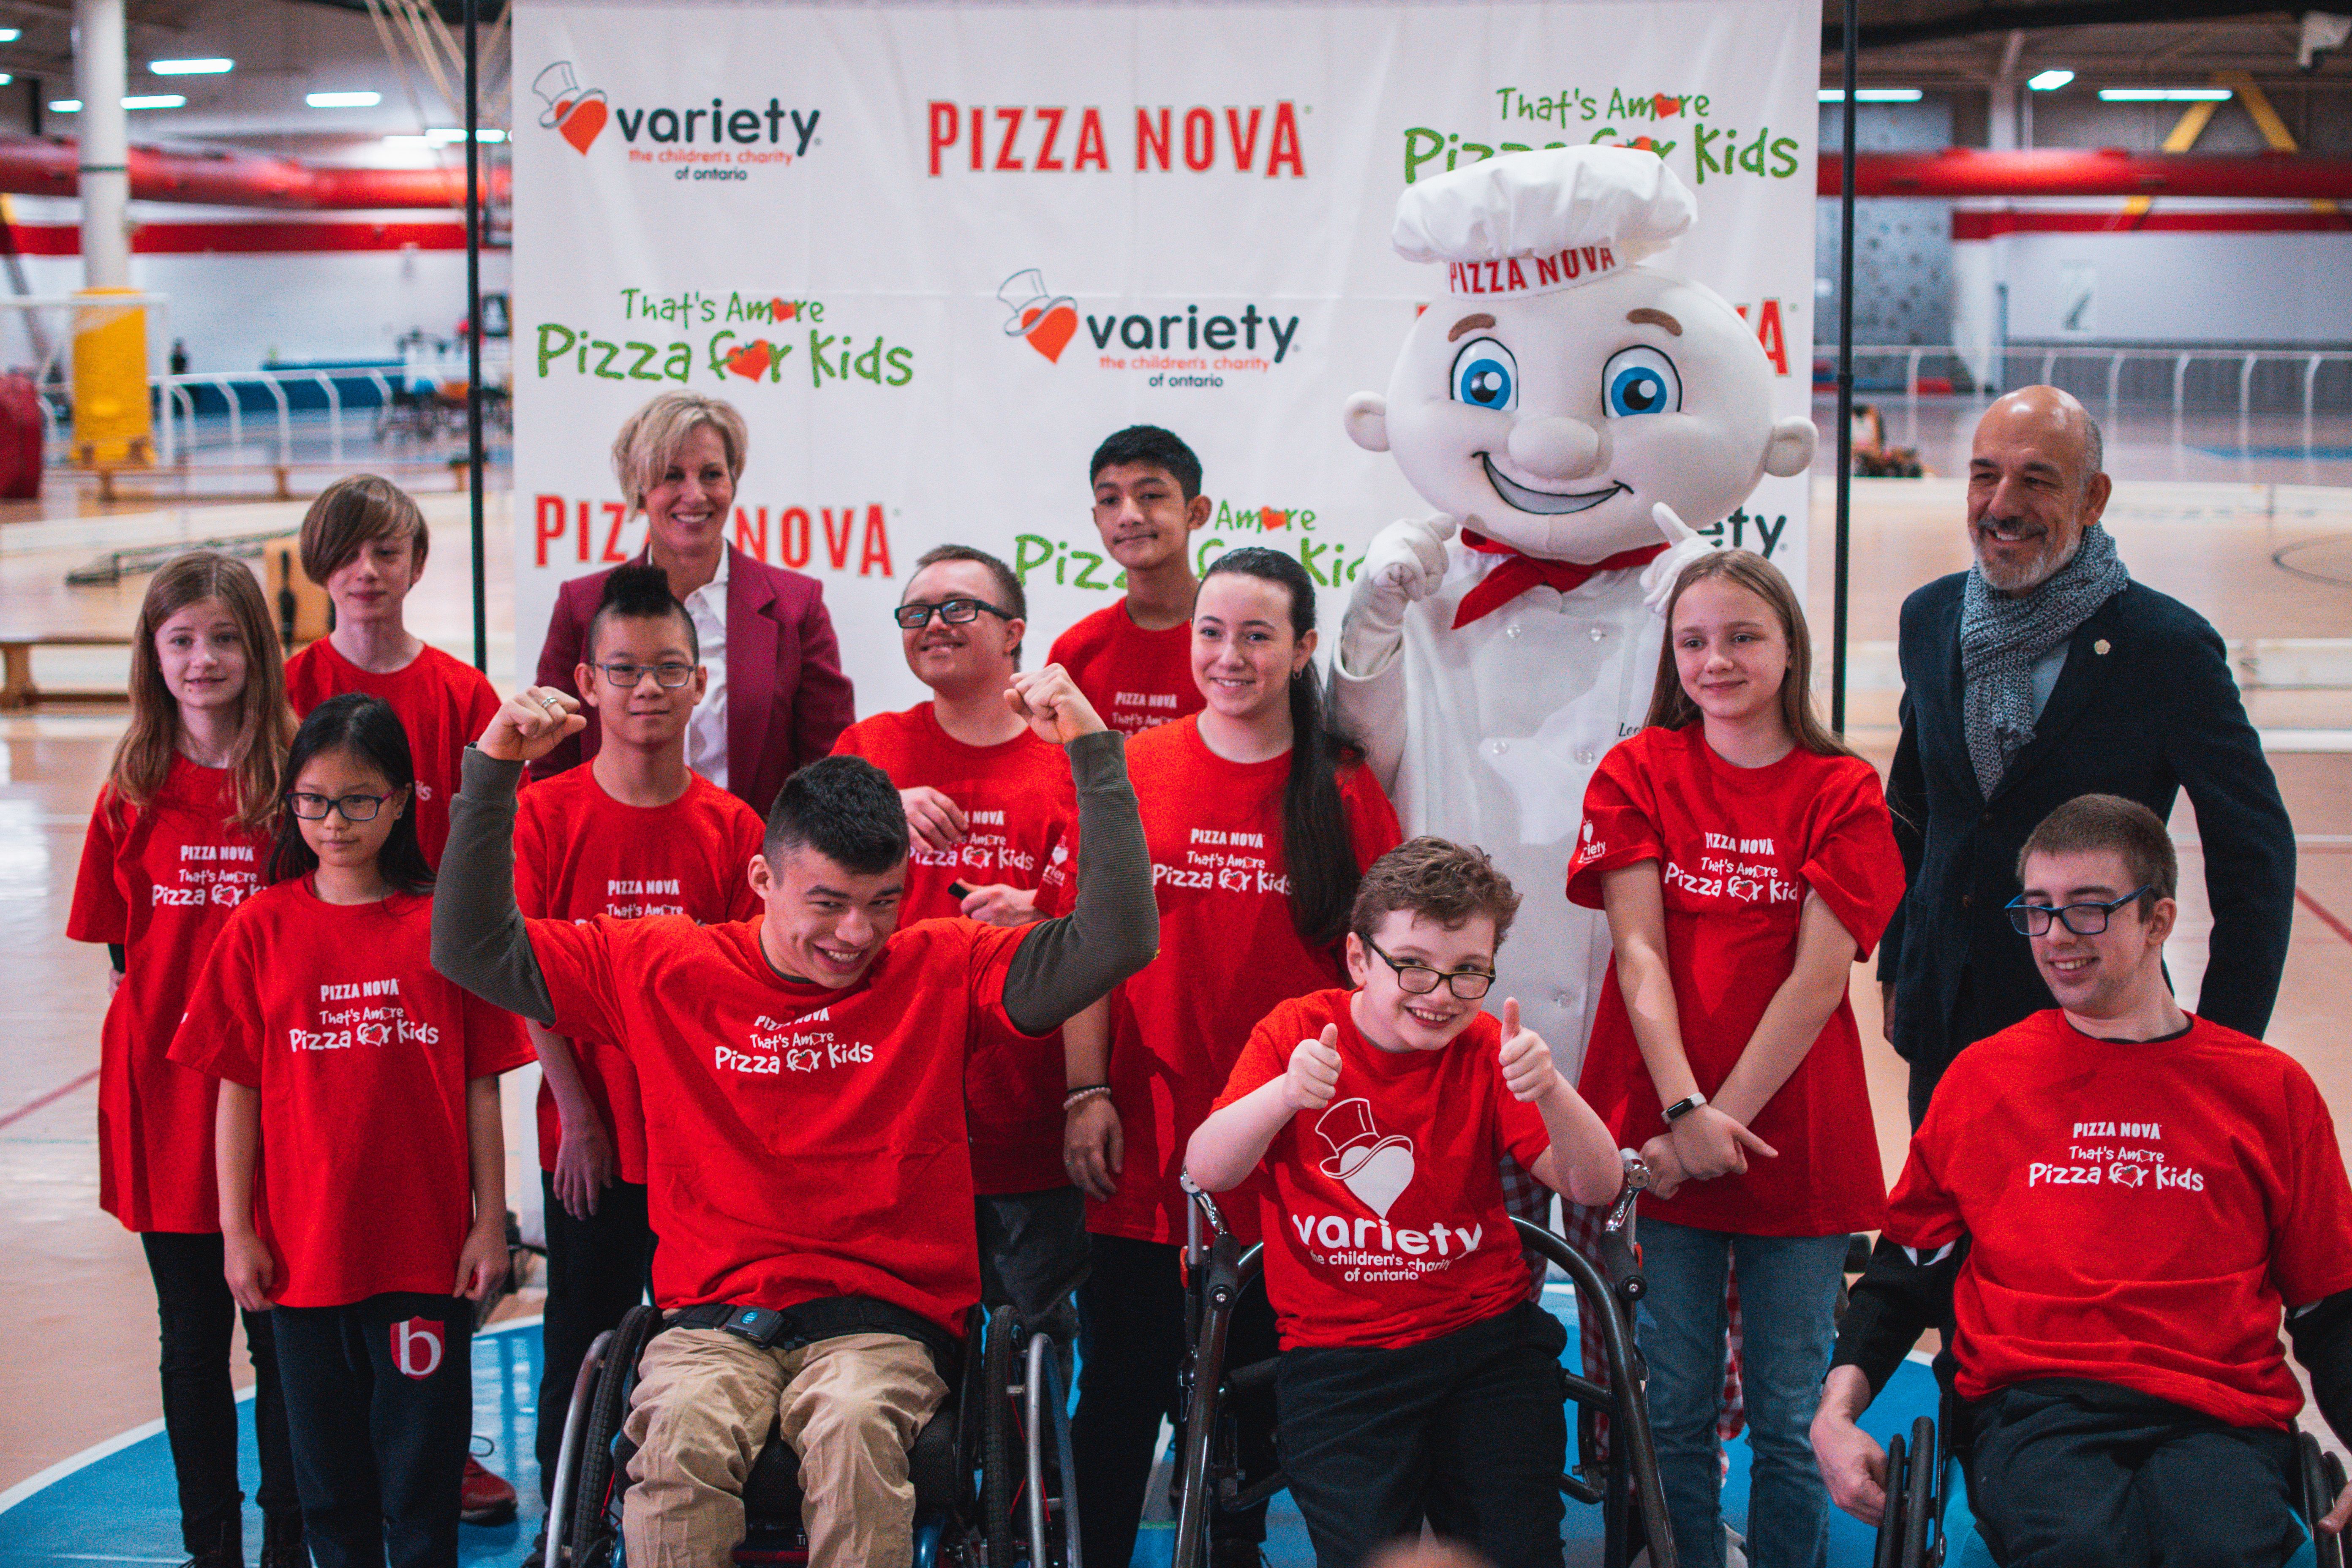 Domenic Primucci, president of Pizza Nova, Karen Stintz, president and CEO of Variety and singer, Roberta Battaglia kick off the 2022 Pizza Nova That’s Amore Pizza for Kids campaign, May 2, at Variety Village in Scarborough, Ont.